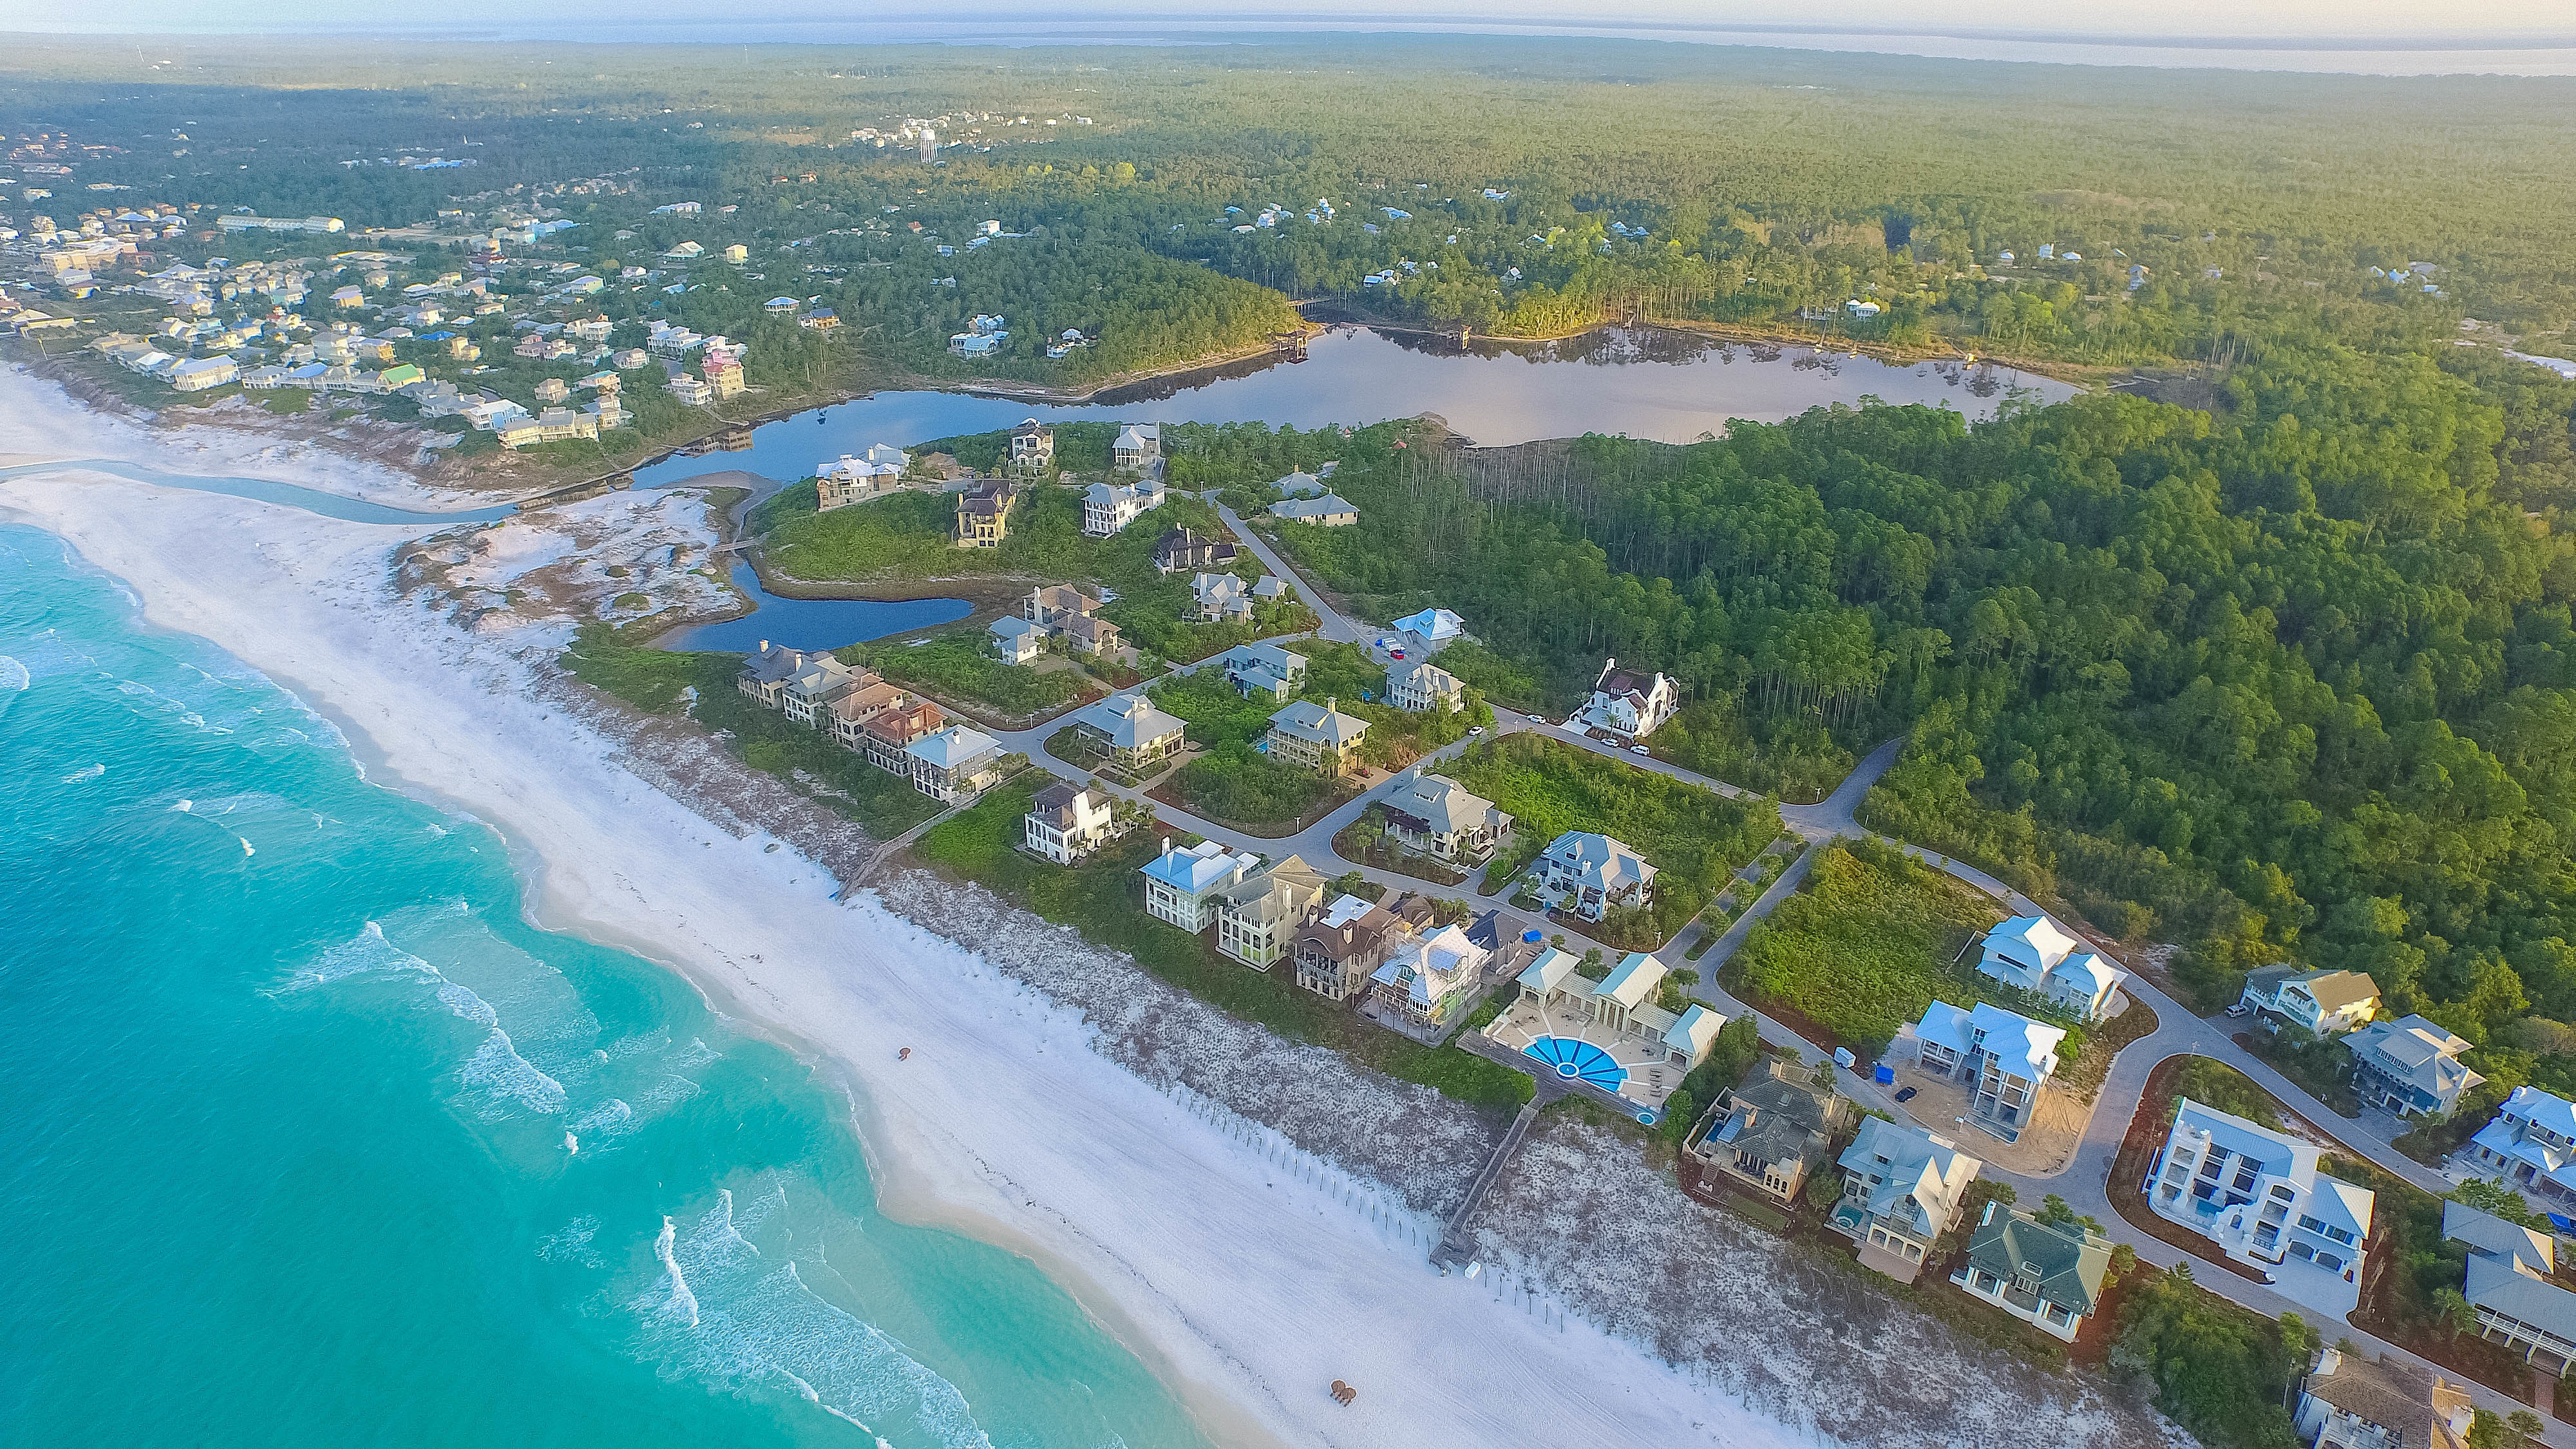 A serene aerial view of The Retreat community with the gulf in the foreground and Draper Lake in the background